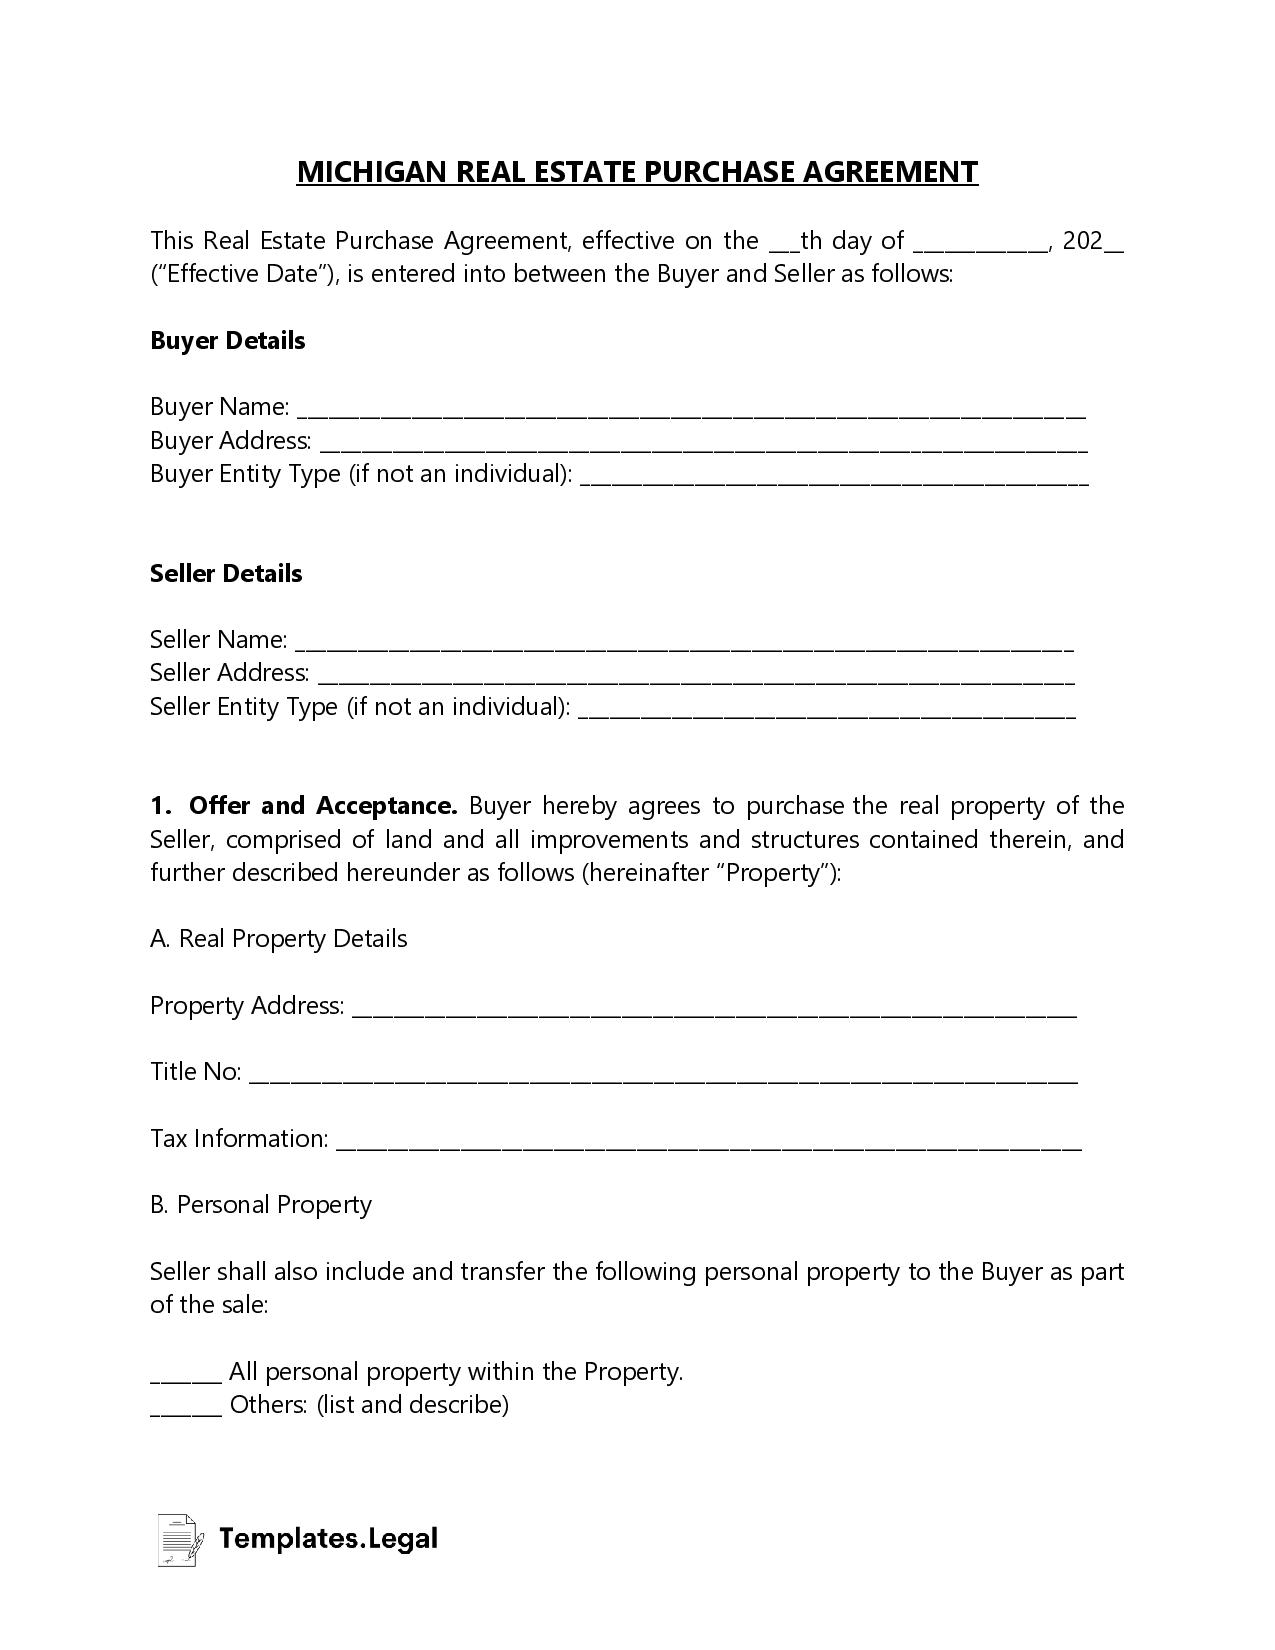 Michigan Real Estate Purchase Agreement - Templates.Legal